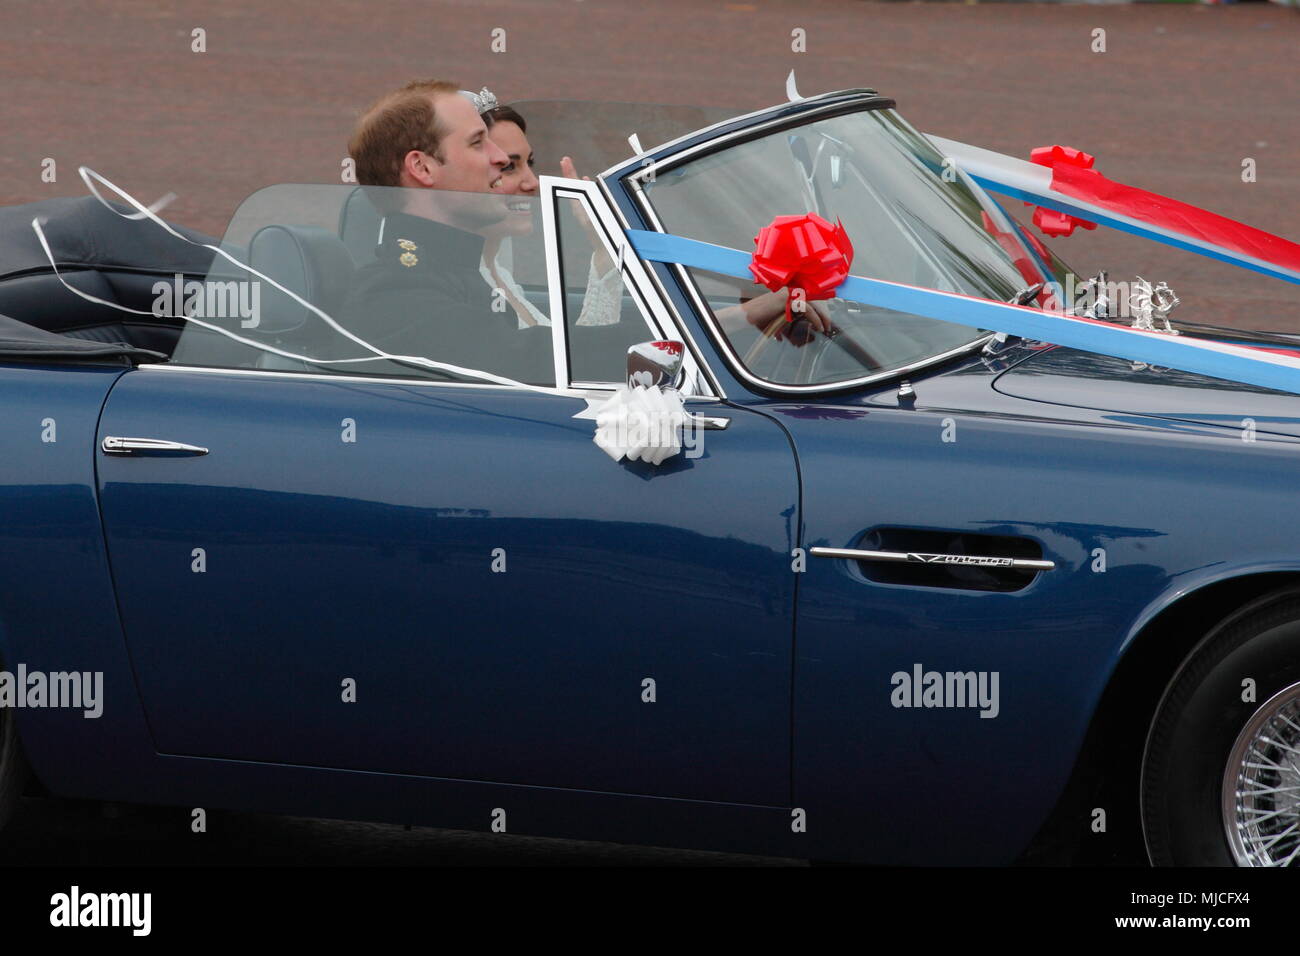 UK - Royal Wedding of Prince William and Kate (Catherine) Middleton - newlyweds William and Kate driving in an open top vintage Aston Martin Volante car along the Mall from  Buckingham Palace 29th April 2011 London UK Stock Photo